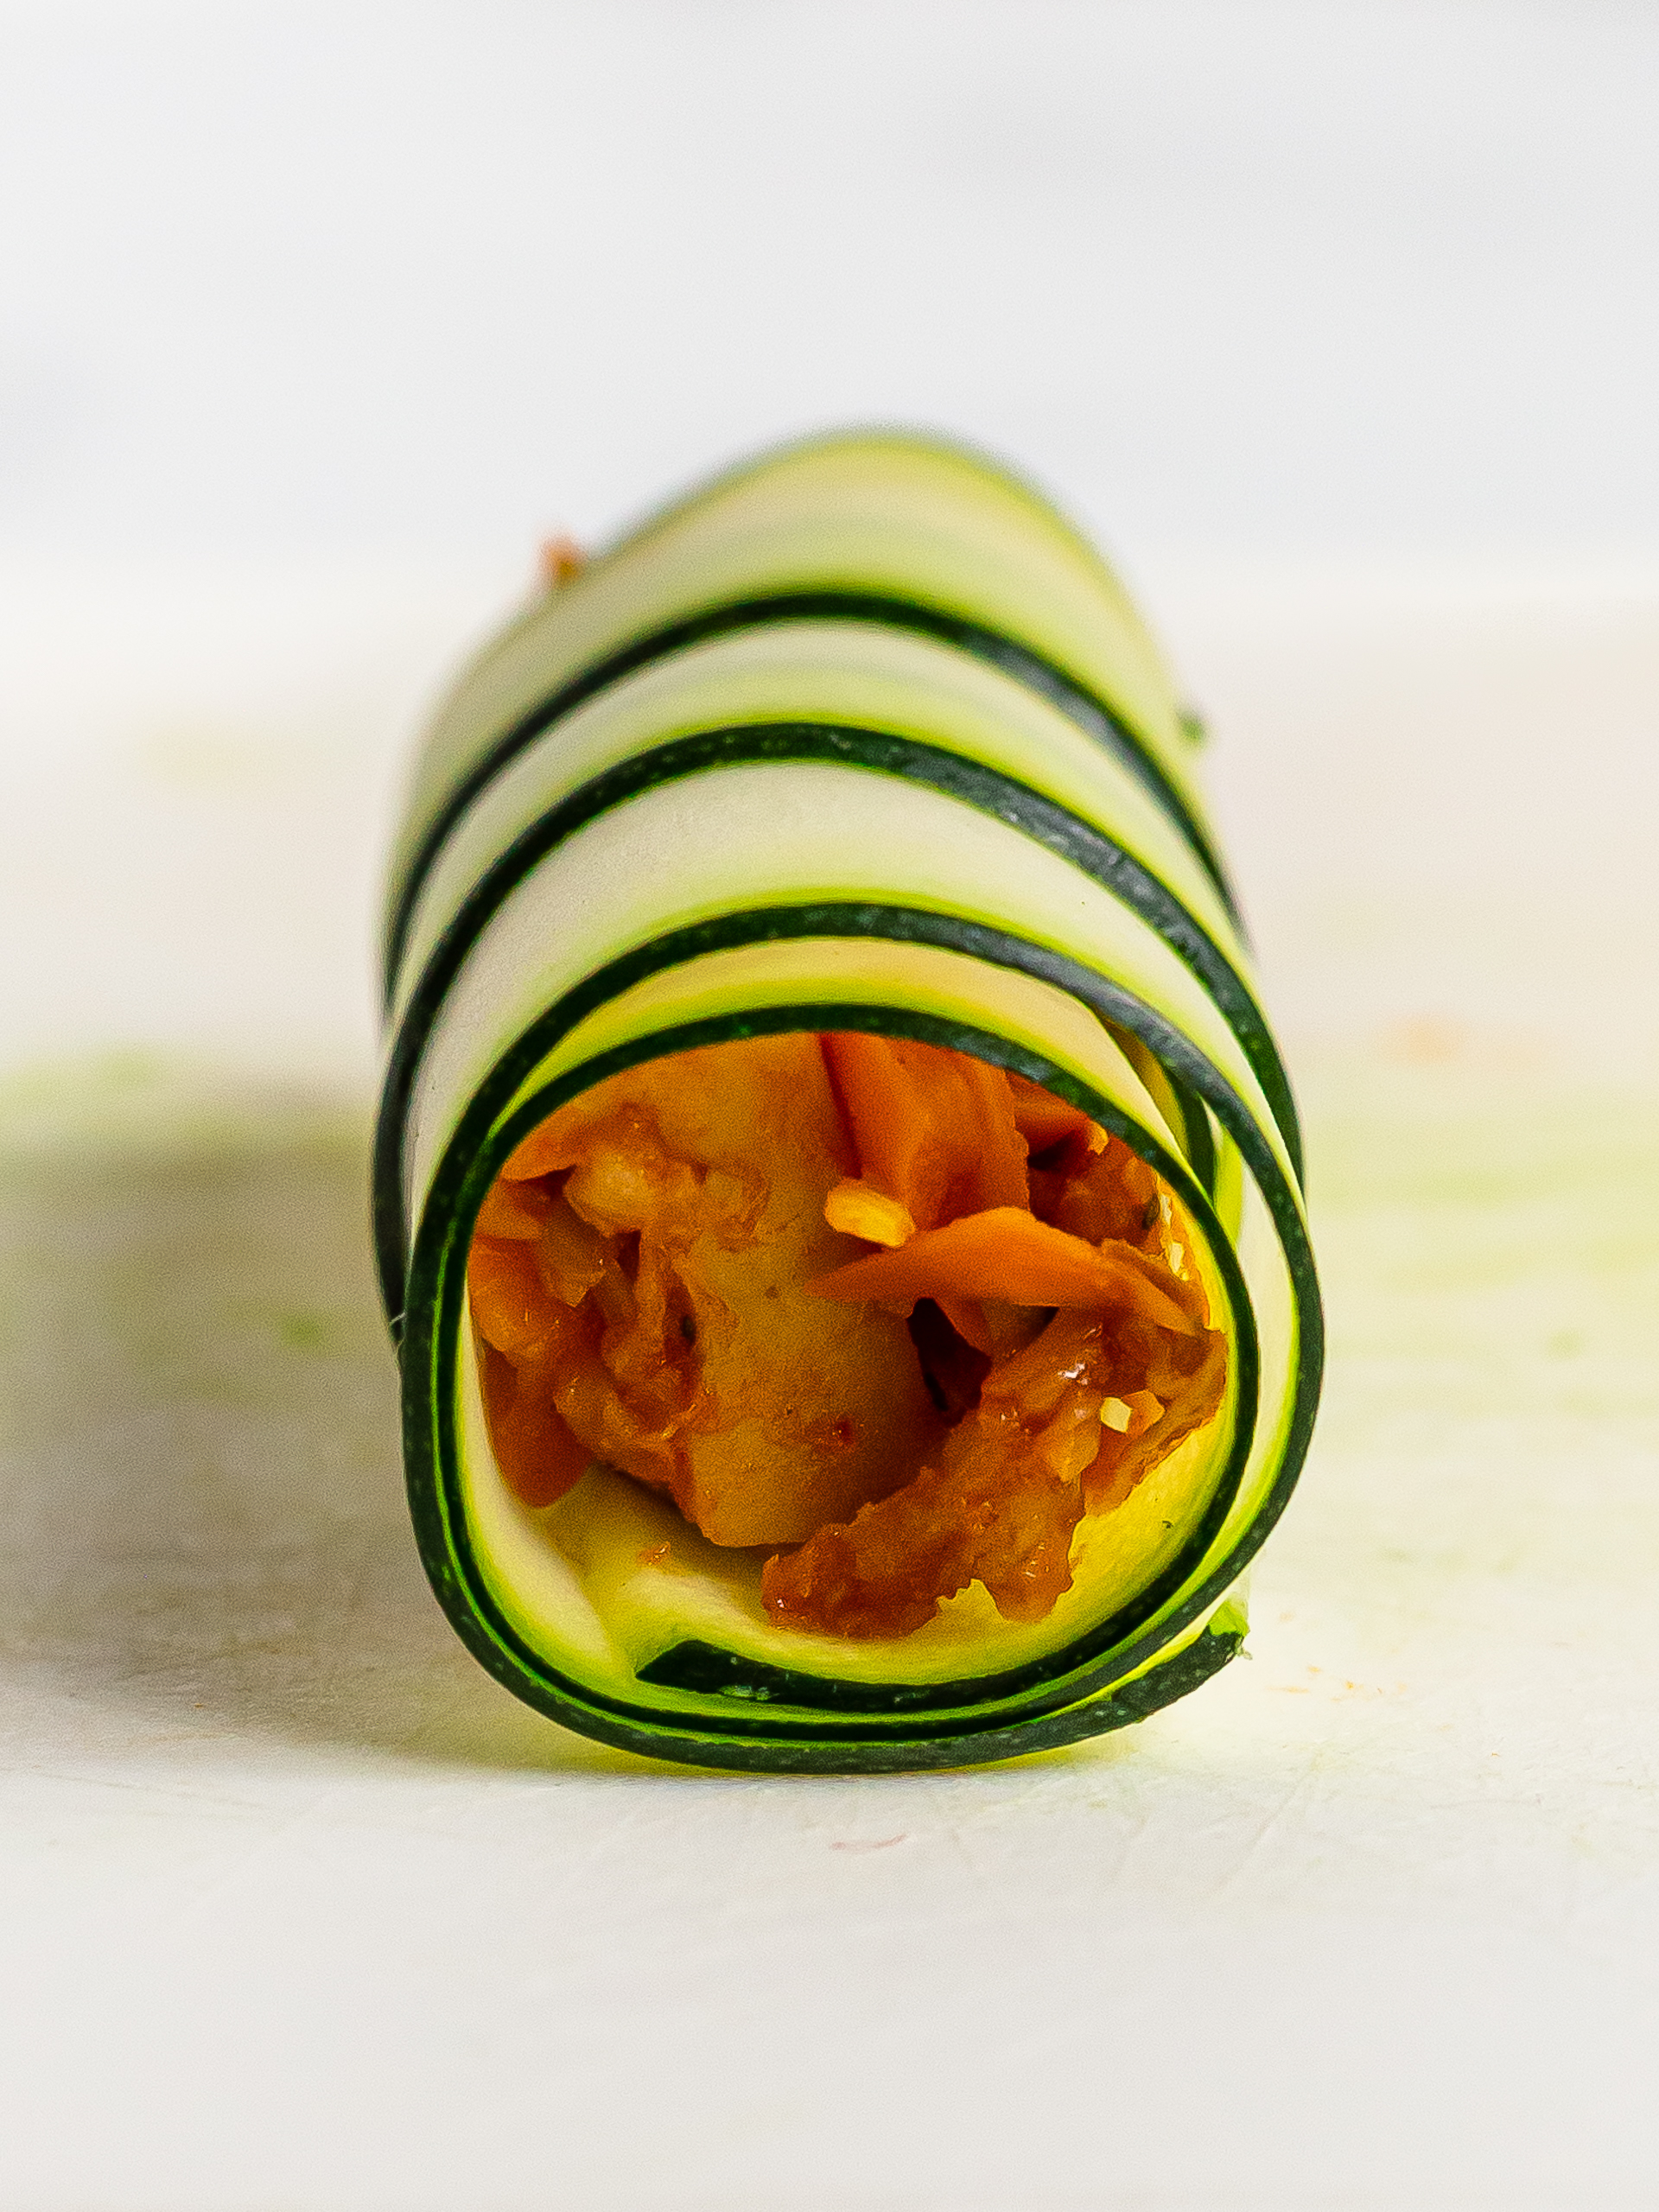 zucchini roll with jackfruit filling